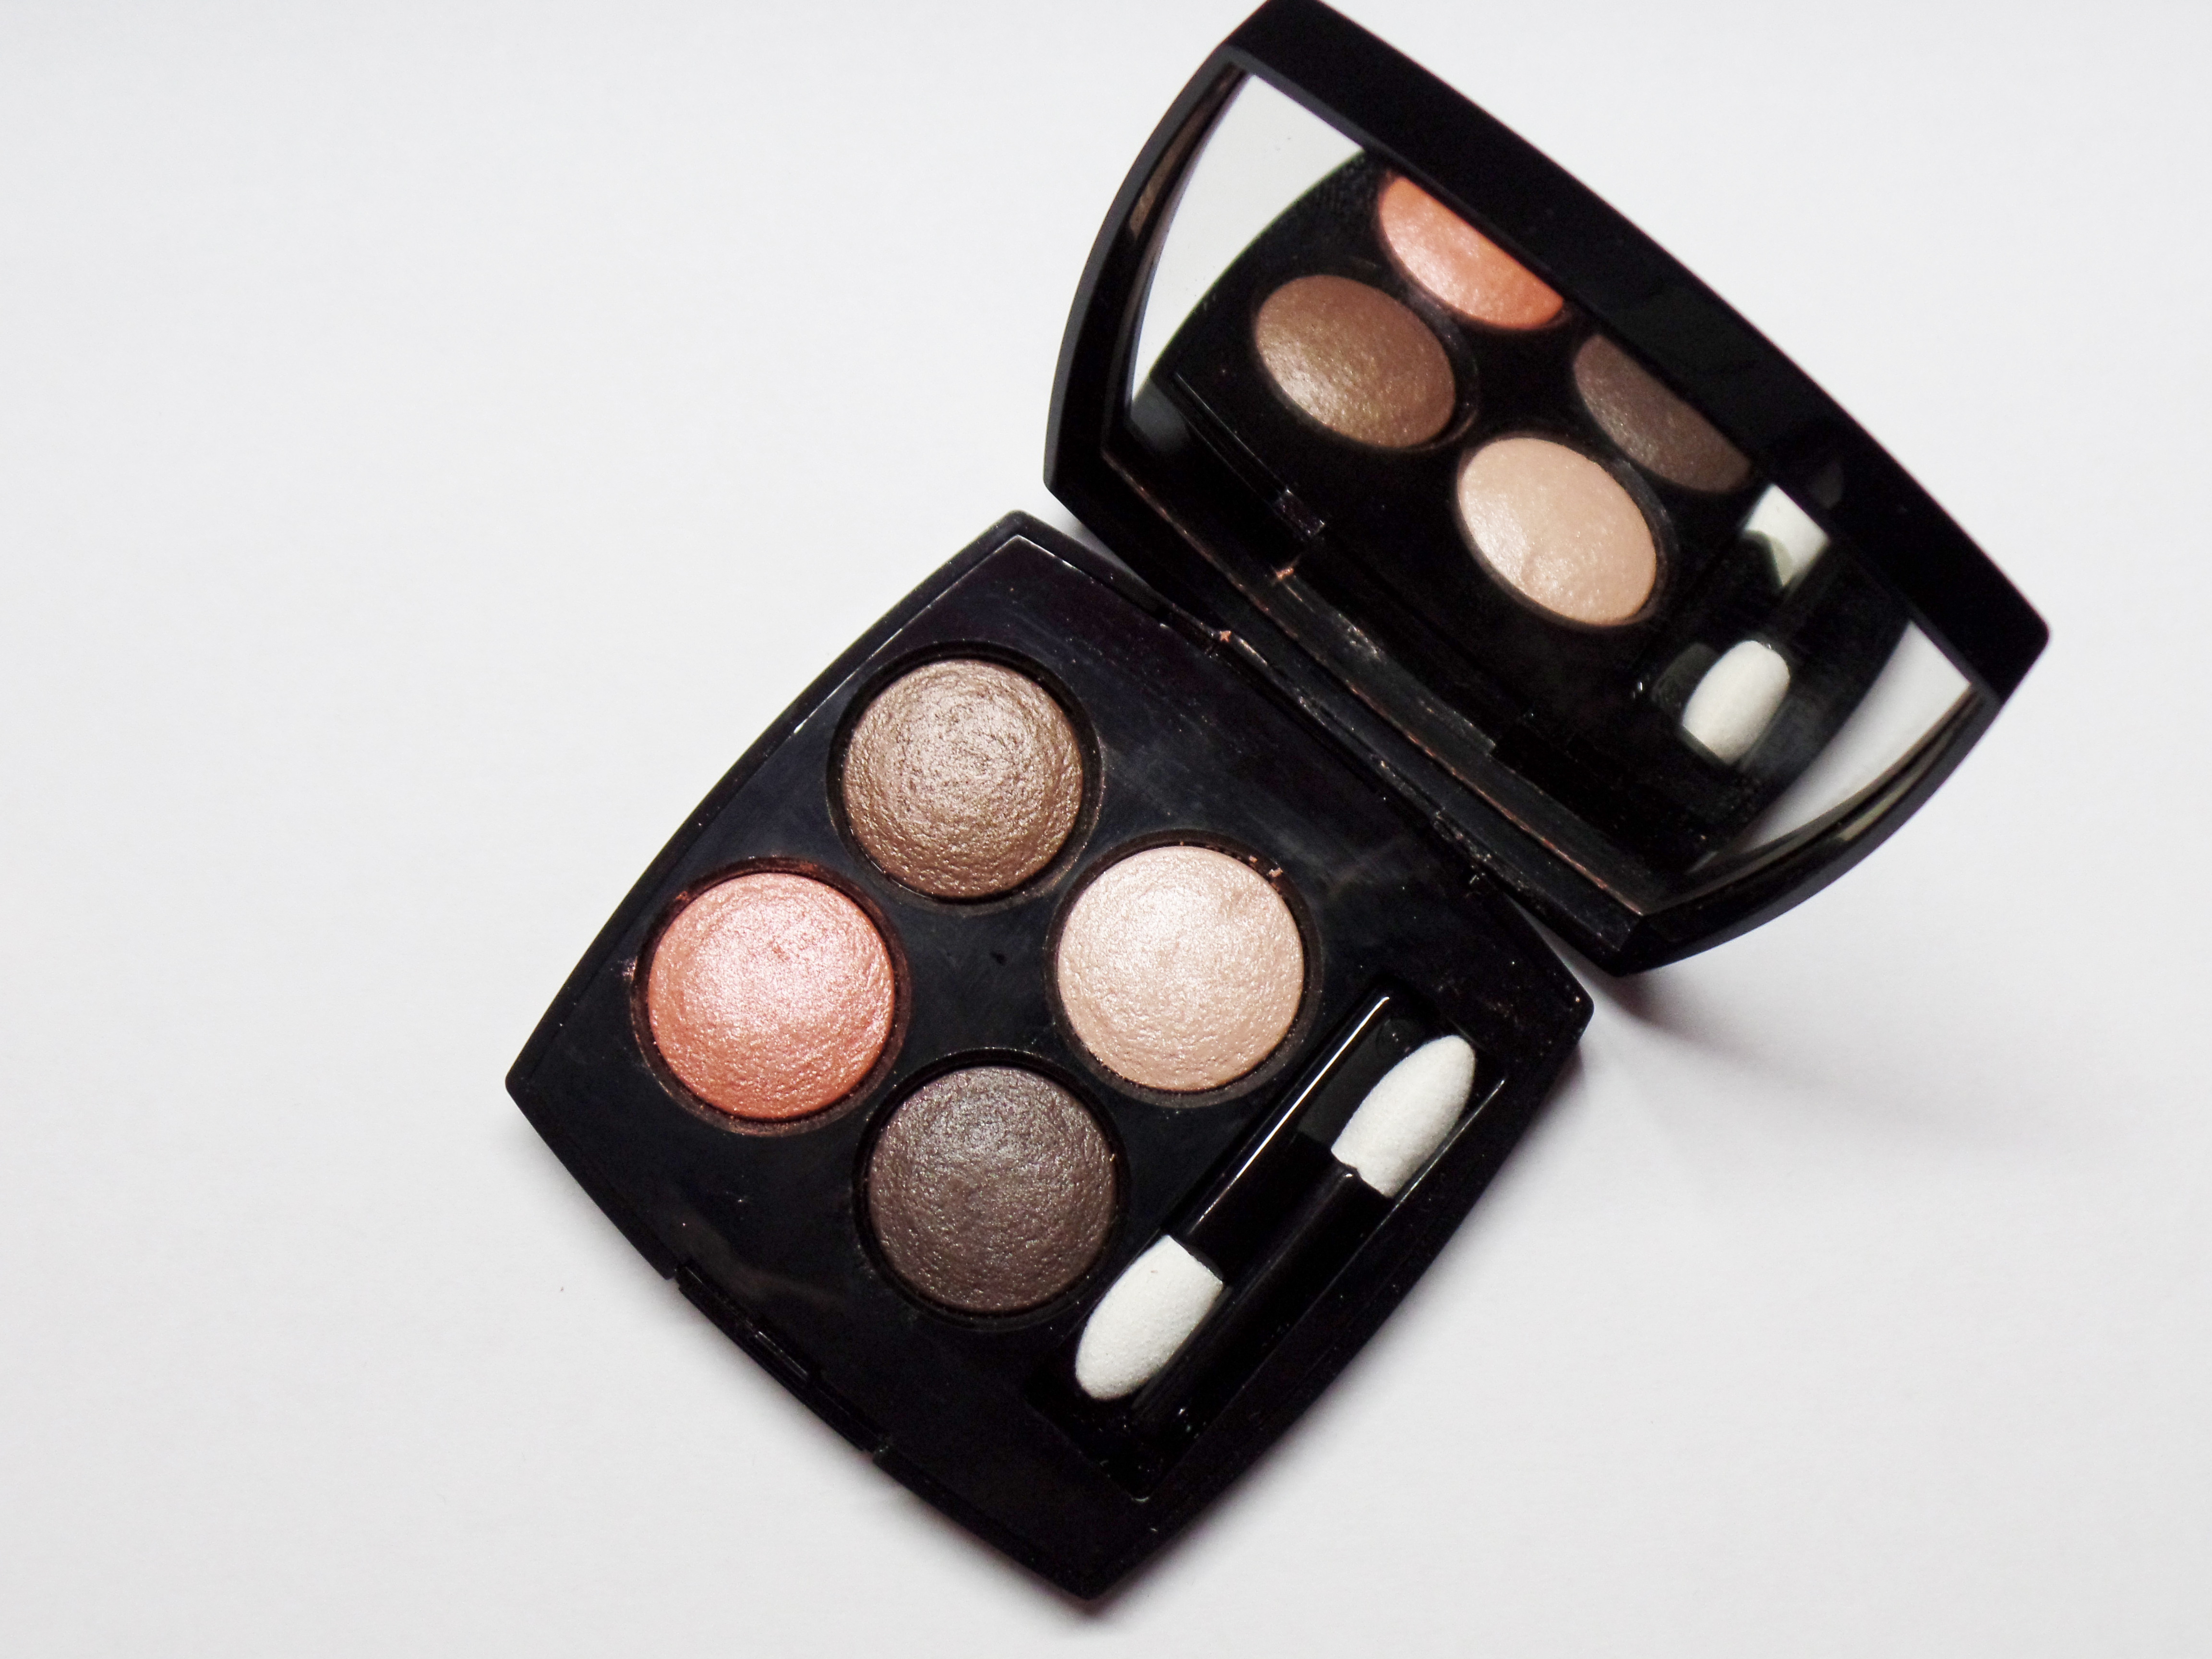 Review: Chanel Les 4 Ombres Multi-Effect Quadra Eyeshadow in 204